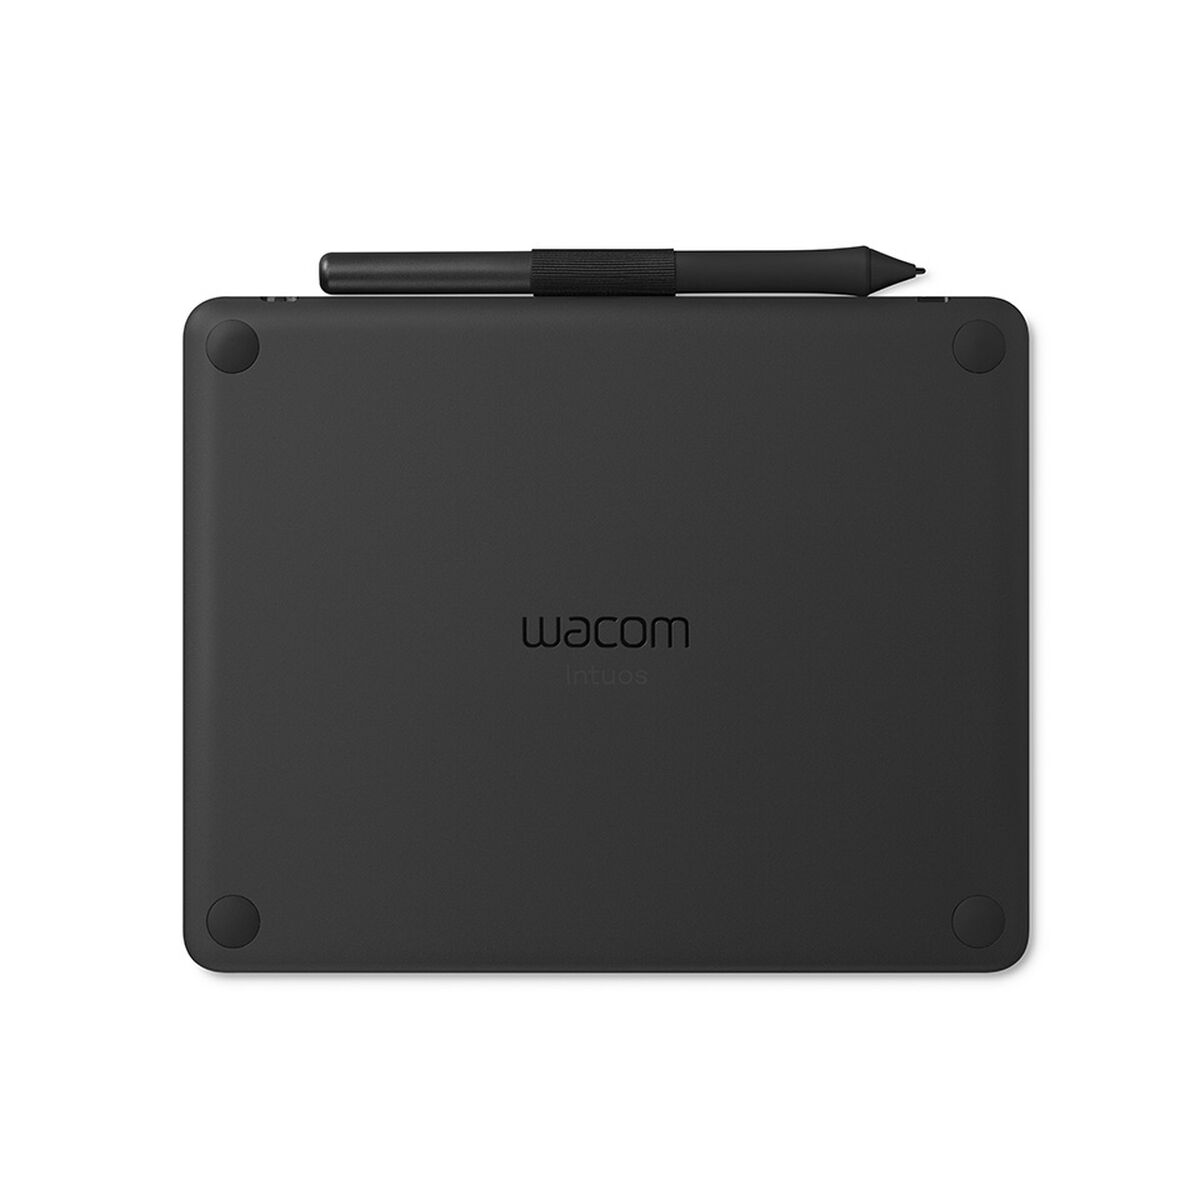 Graphics tablets and pens Wacom CTL-6100WLK-S, Wacom, Computing, Accessories, graphics-tablets-and-pens-wacom-ctl-6100wlk-s, Brand_Wacom, category-reference-2609, category-reference-2803, category-reference-2812, category-reference-t-19685, category-reference-t-19908, category-reference-t-21353, computers / components, Condition_NEW, Price_200 - 300, Teleworking, RiotNook